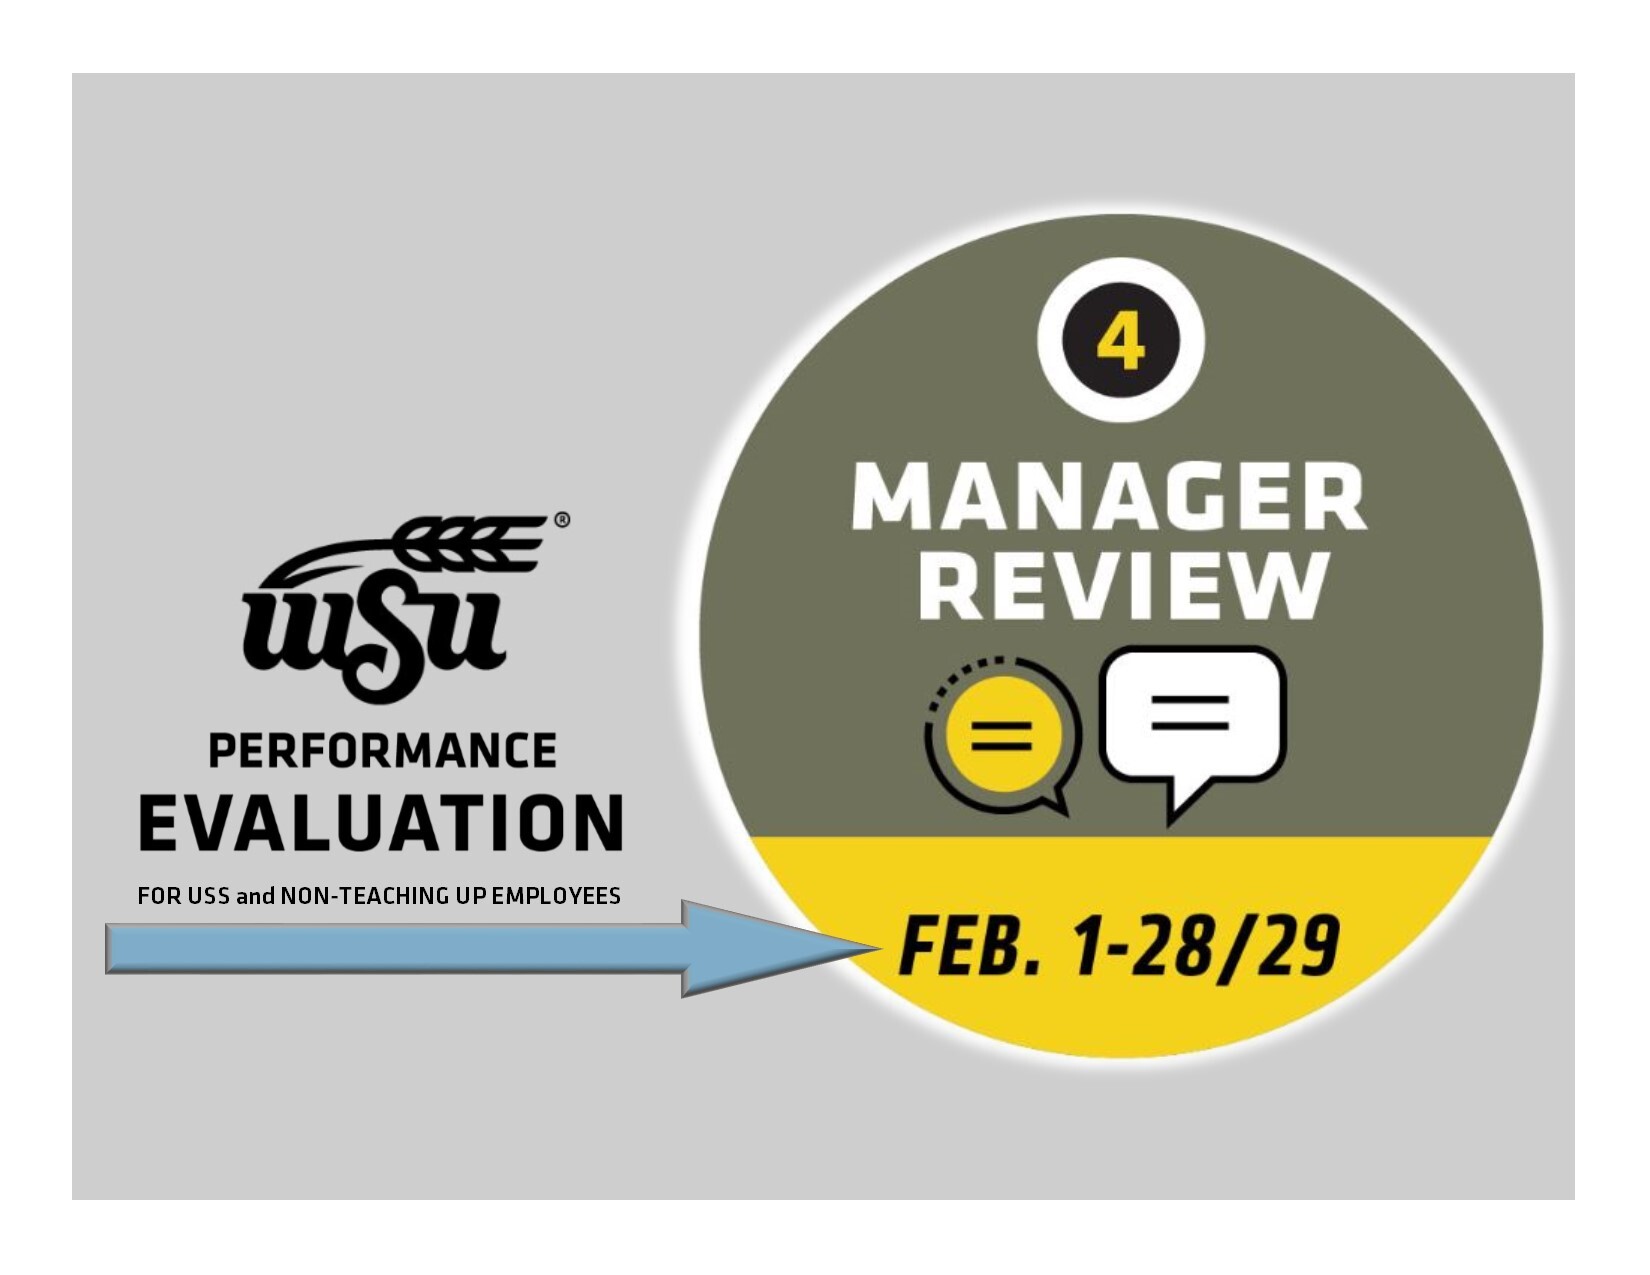 WSU Performance Evaluation for USS and non-teaching UP Employees: Manager Review Feb. 1-28